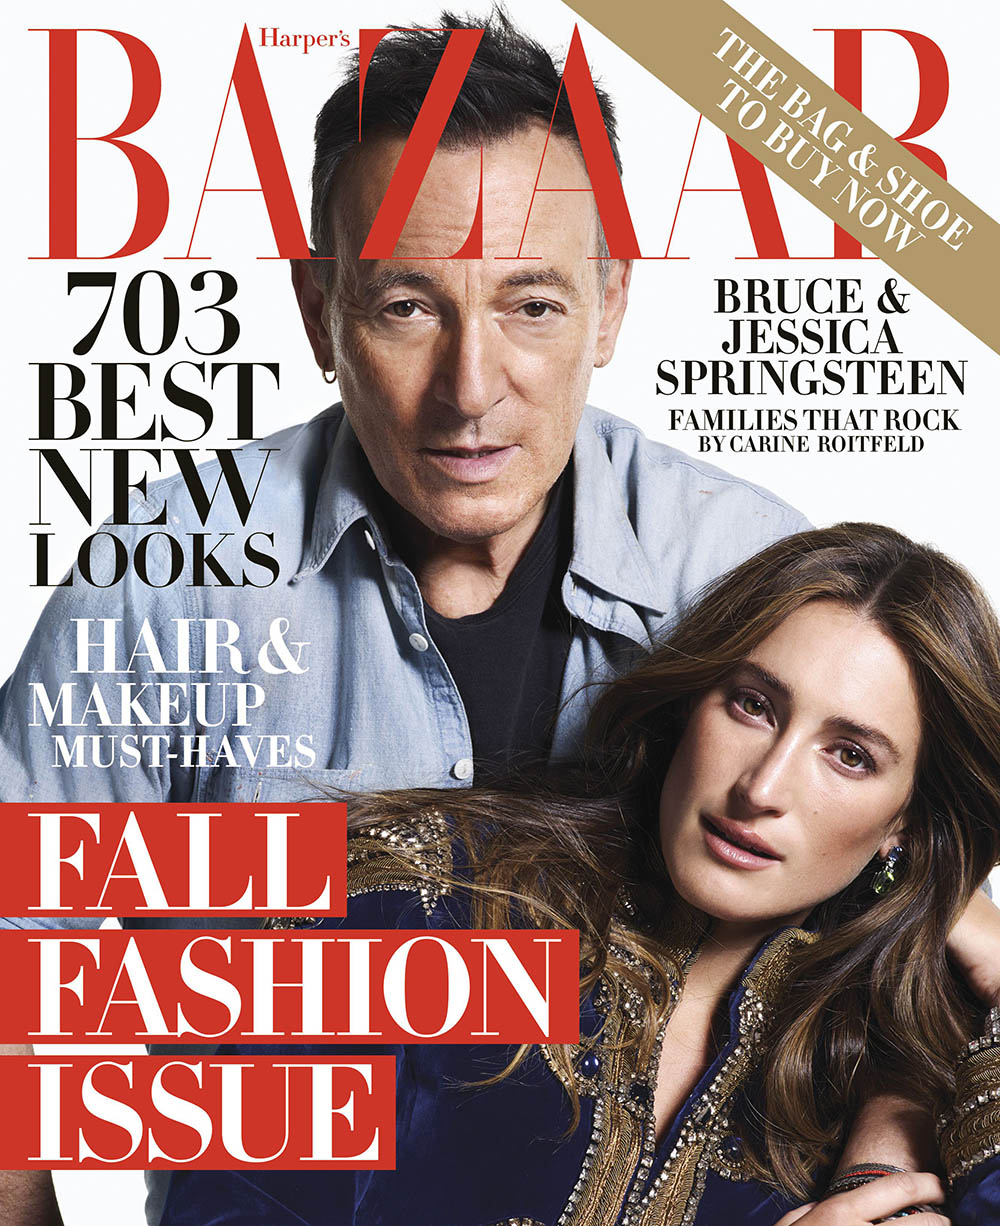 Music icons pose with their kids for Harper’s Bazaar US September 2018 by Mario Sorrenti